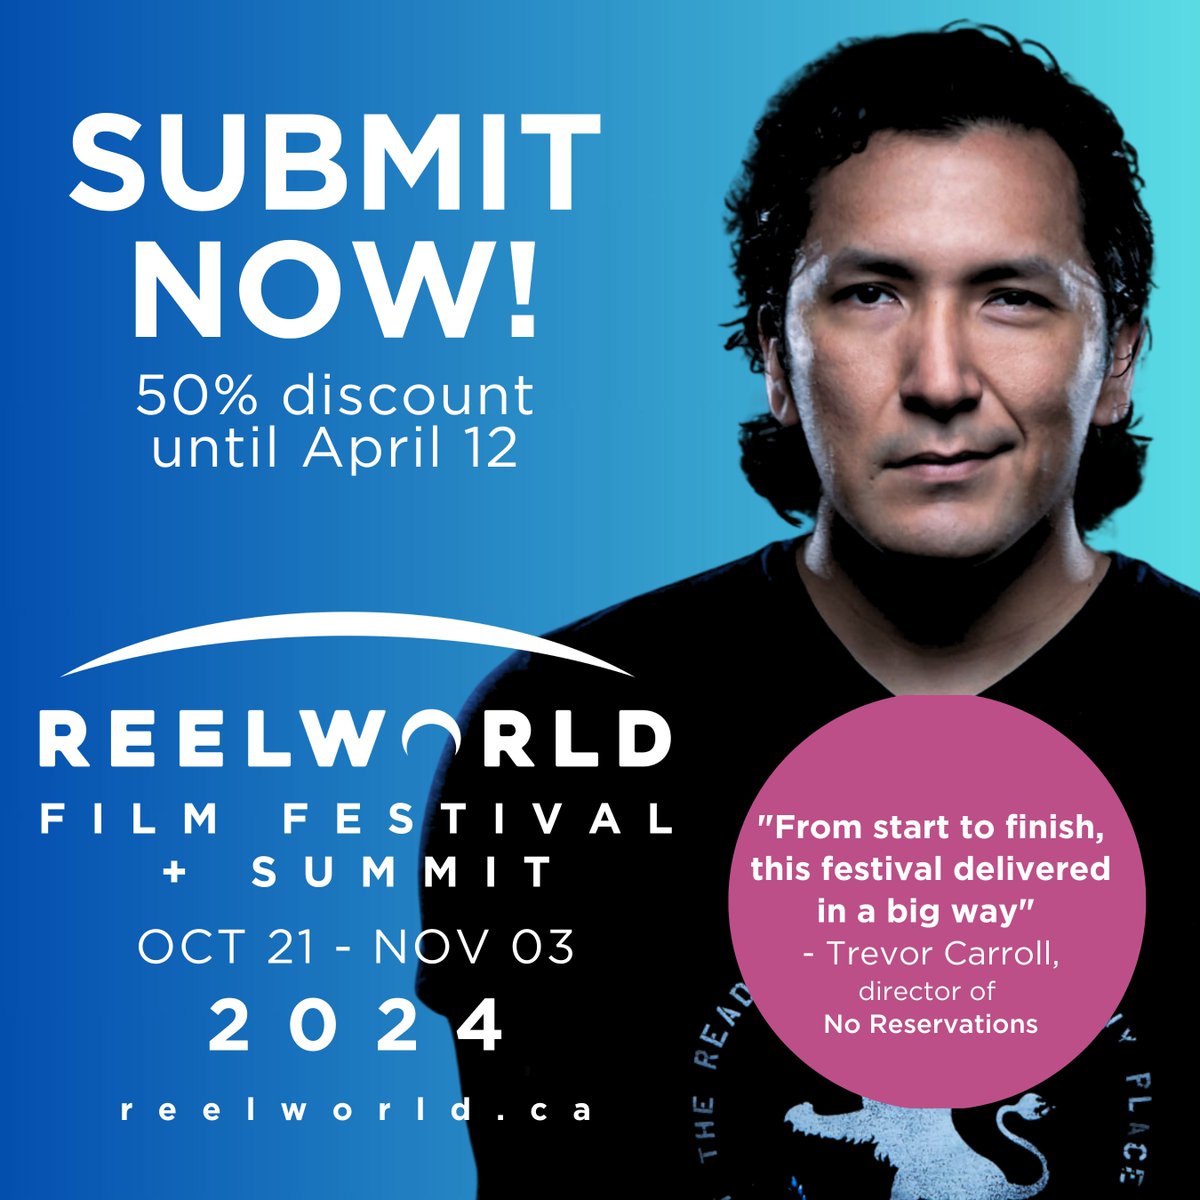 The Reelworld Film Festival+Summit is accepting film submissions from Canadian Black, Indigenous, and People of Colour for the 24th annual festival! Take advantage of the 50% submission discount before April 12th. For more details, visit reelworld.ca/2024film-submi….